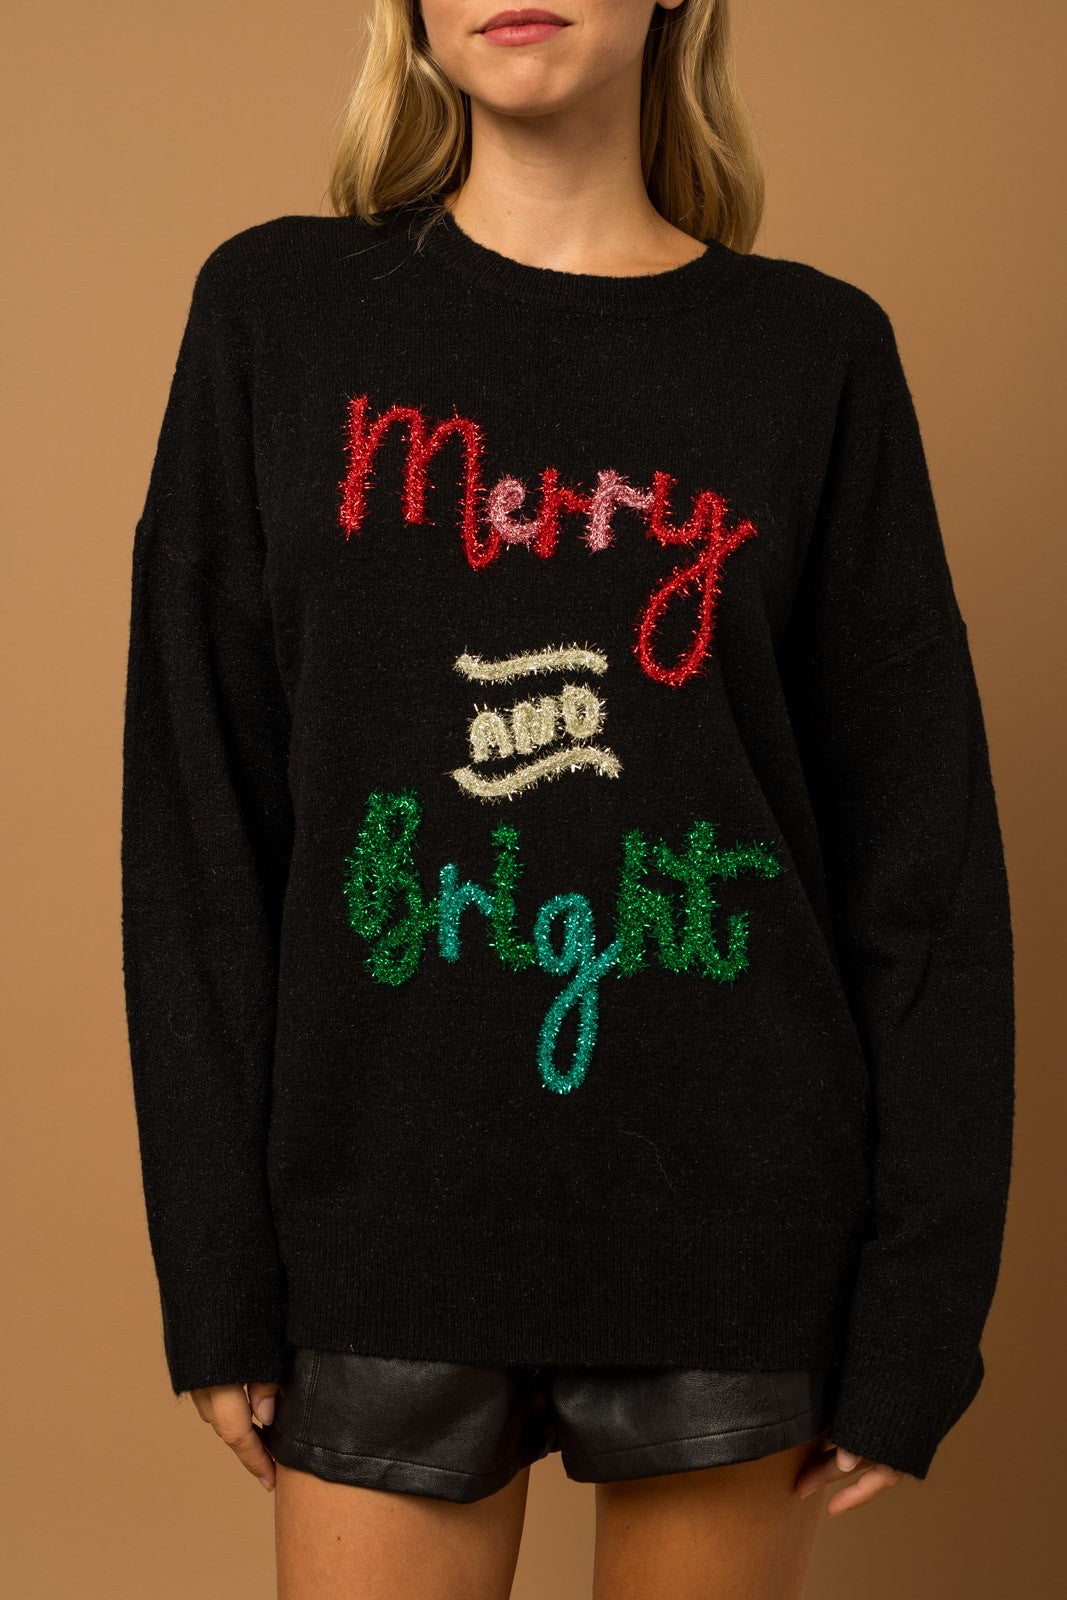 Merry and bright sparkly Christmas sweater